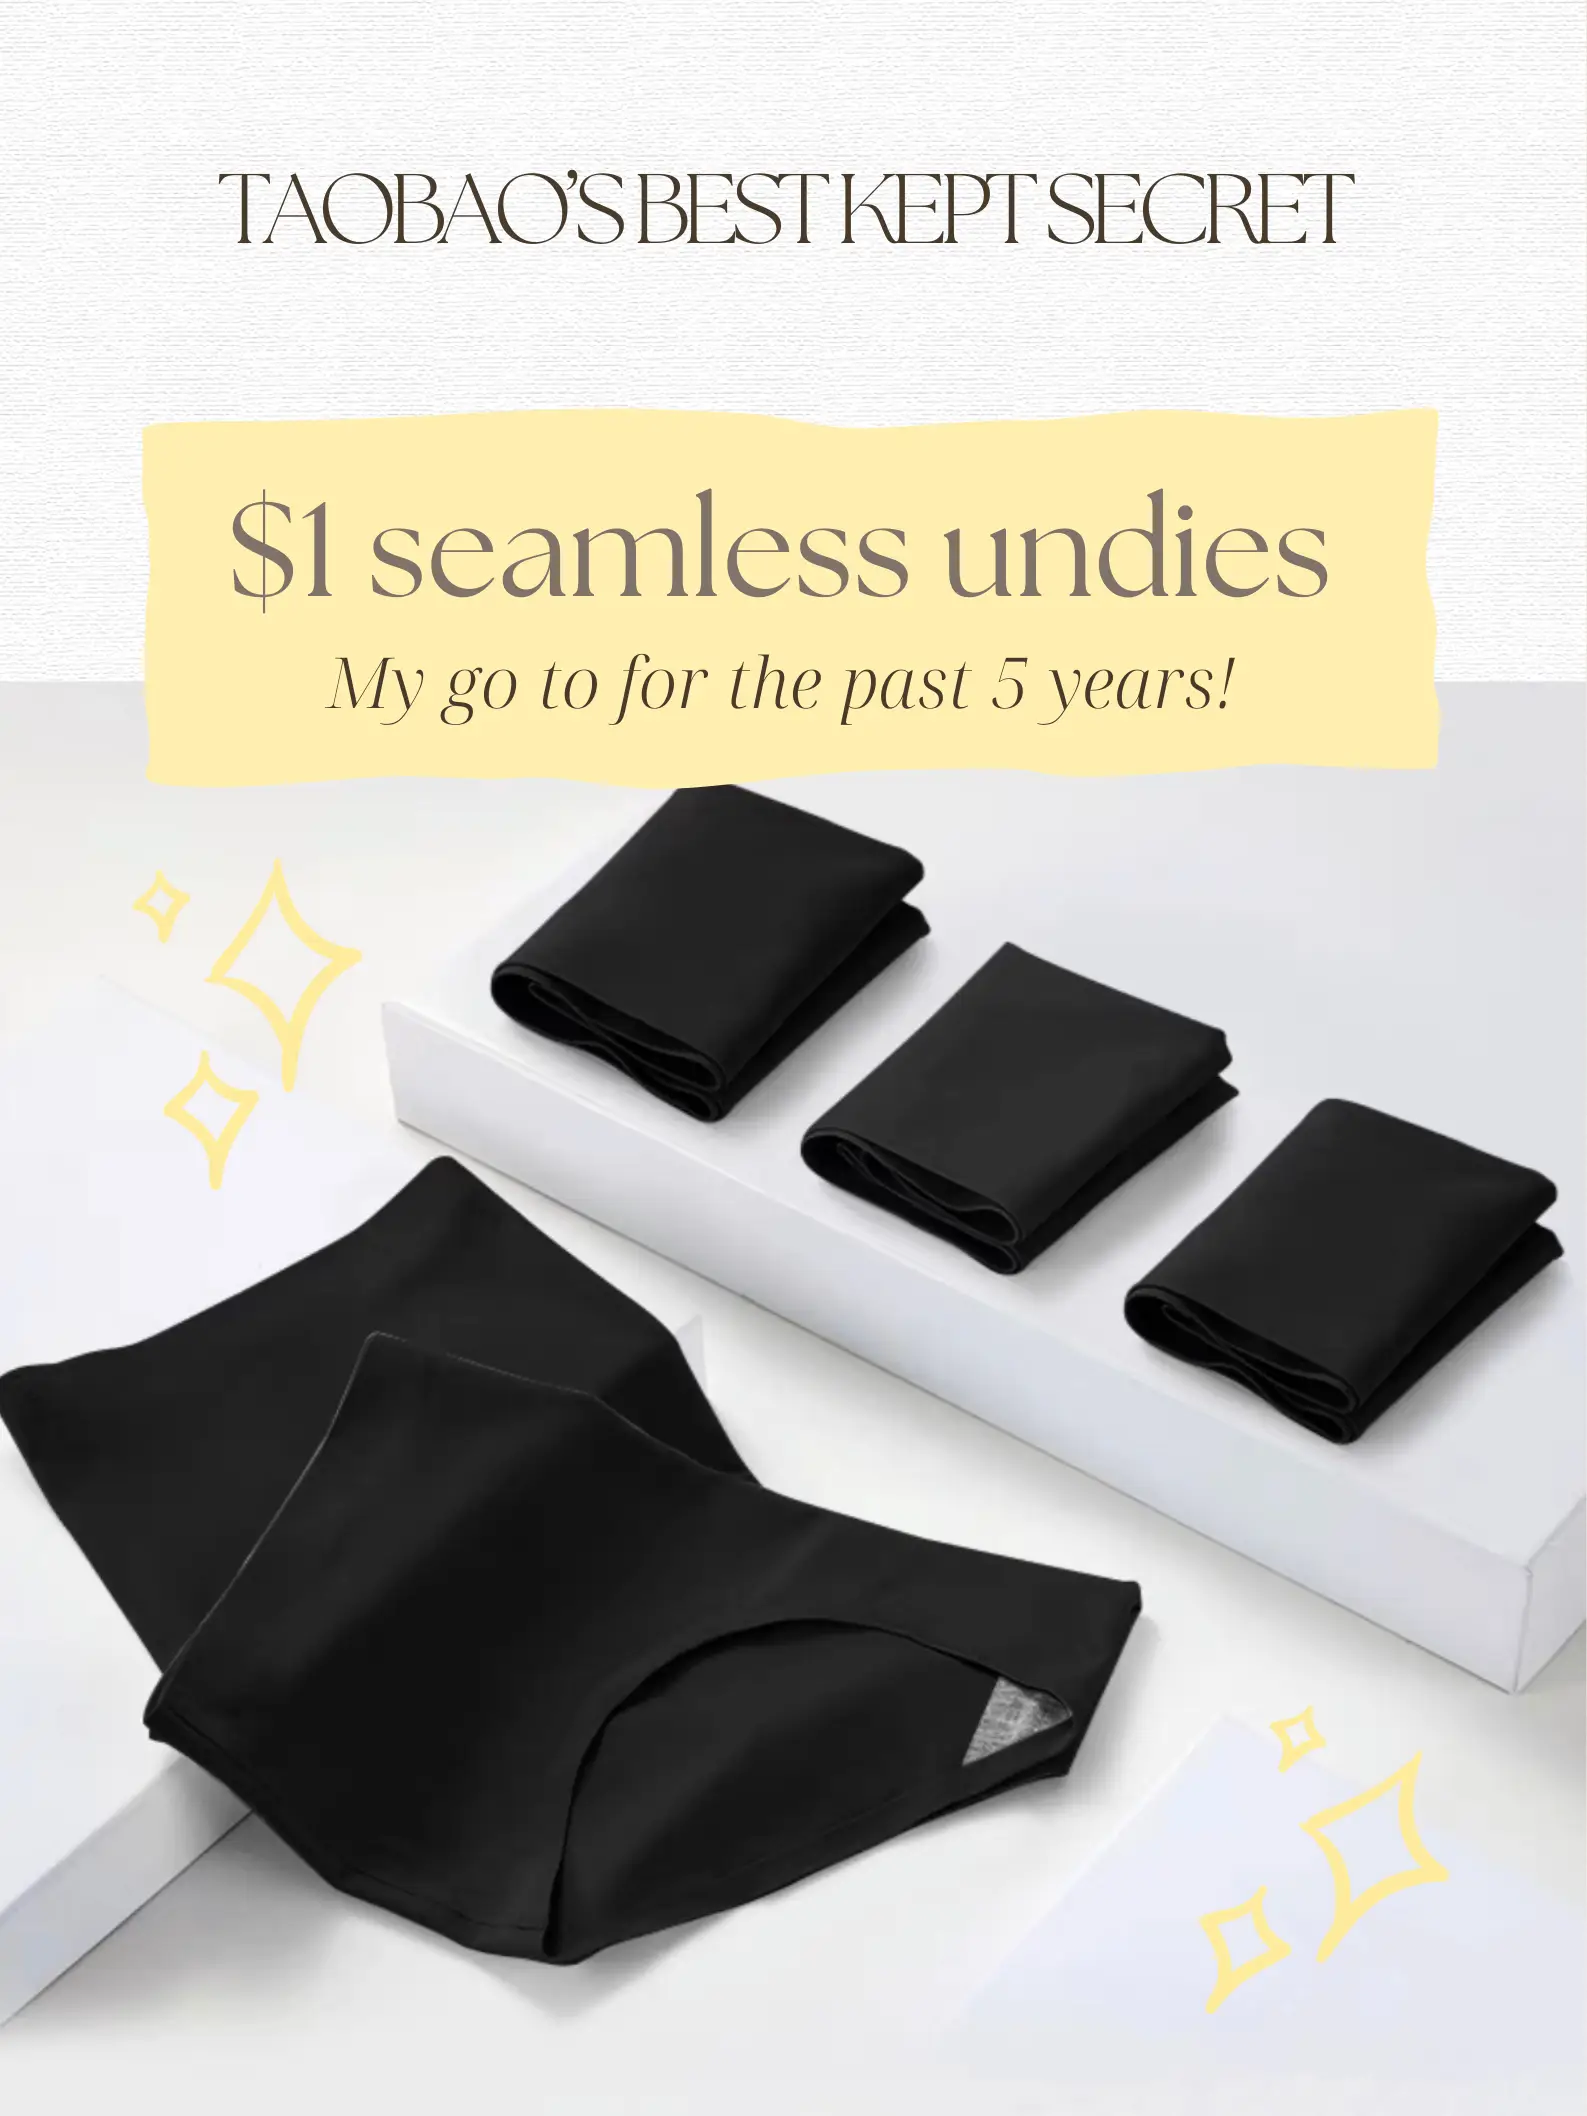 Budget Queen: Seamless undies for only $1 😂